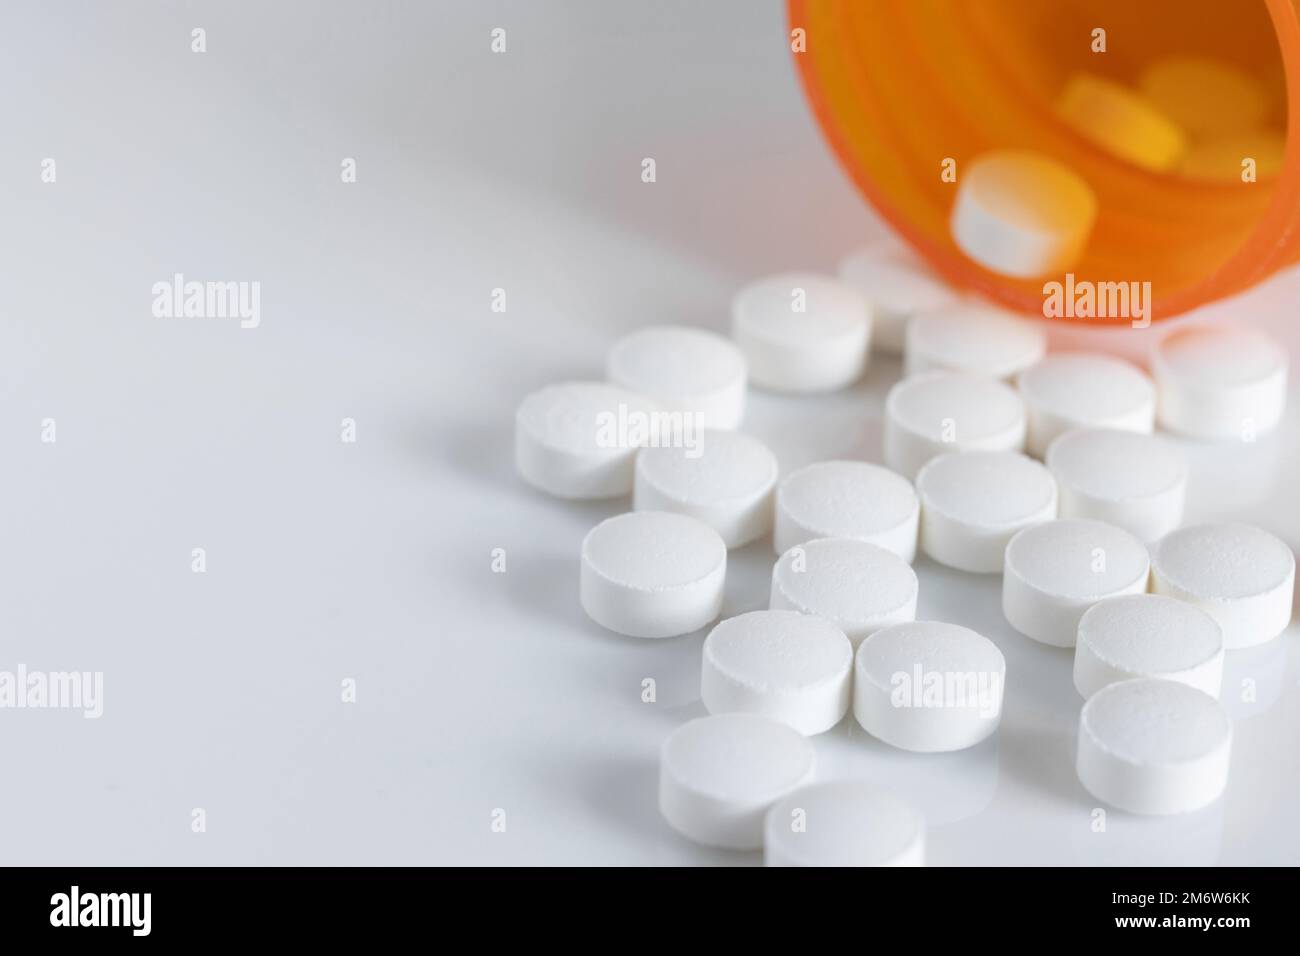 round, white tablet pills spilt out of a medicine bottle on a white background with copy space, shallow depth of field Stock Photo